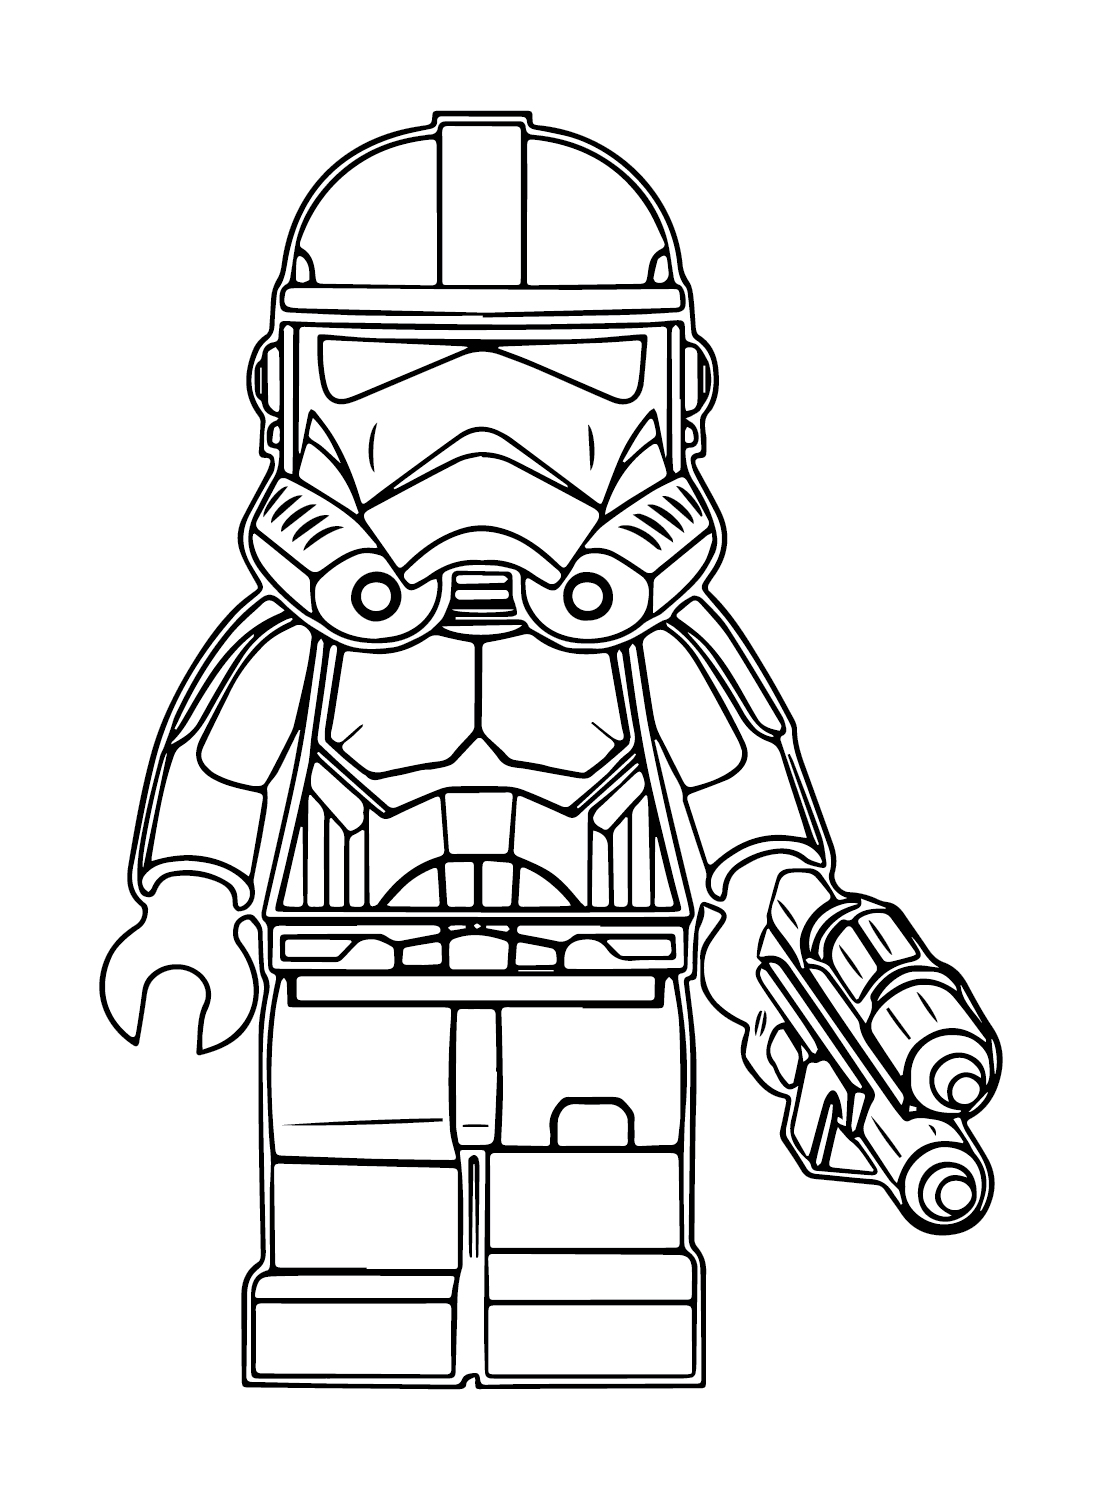 Lego Shock Trooper 2 Coloring Page